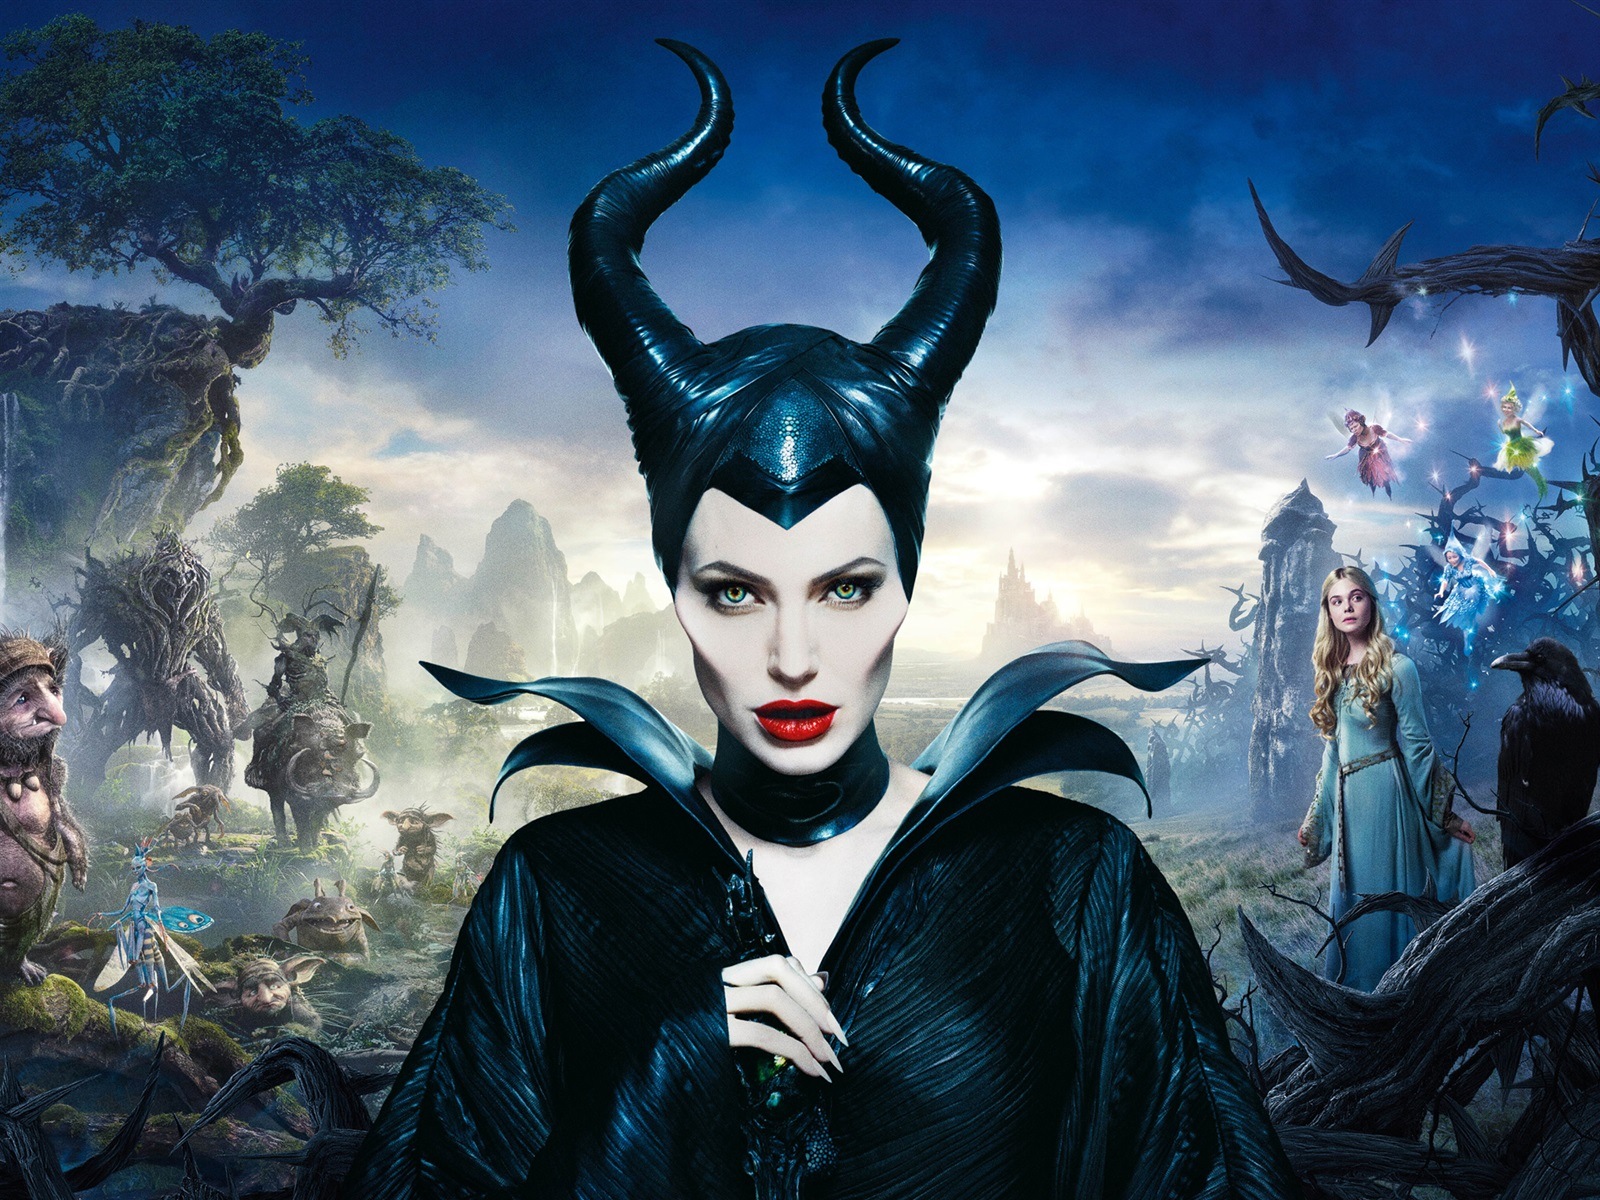 Maleficent 2014 HD movie wallpapers #6 - 1600x1200